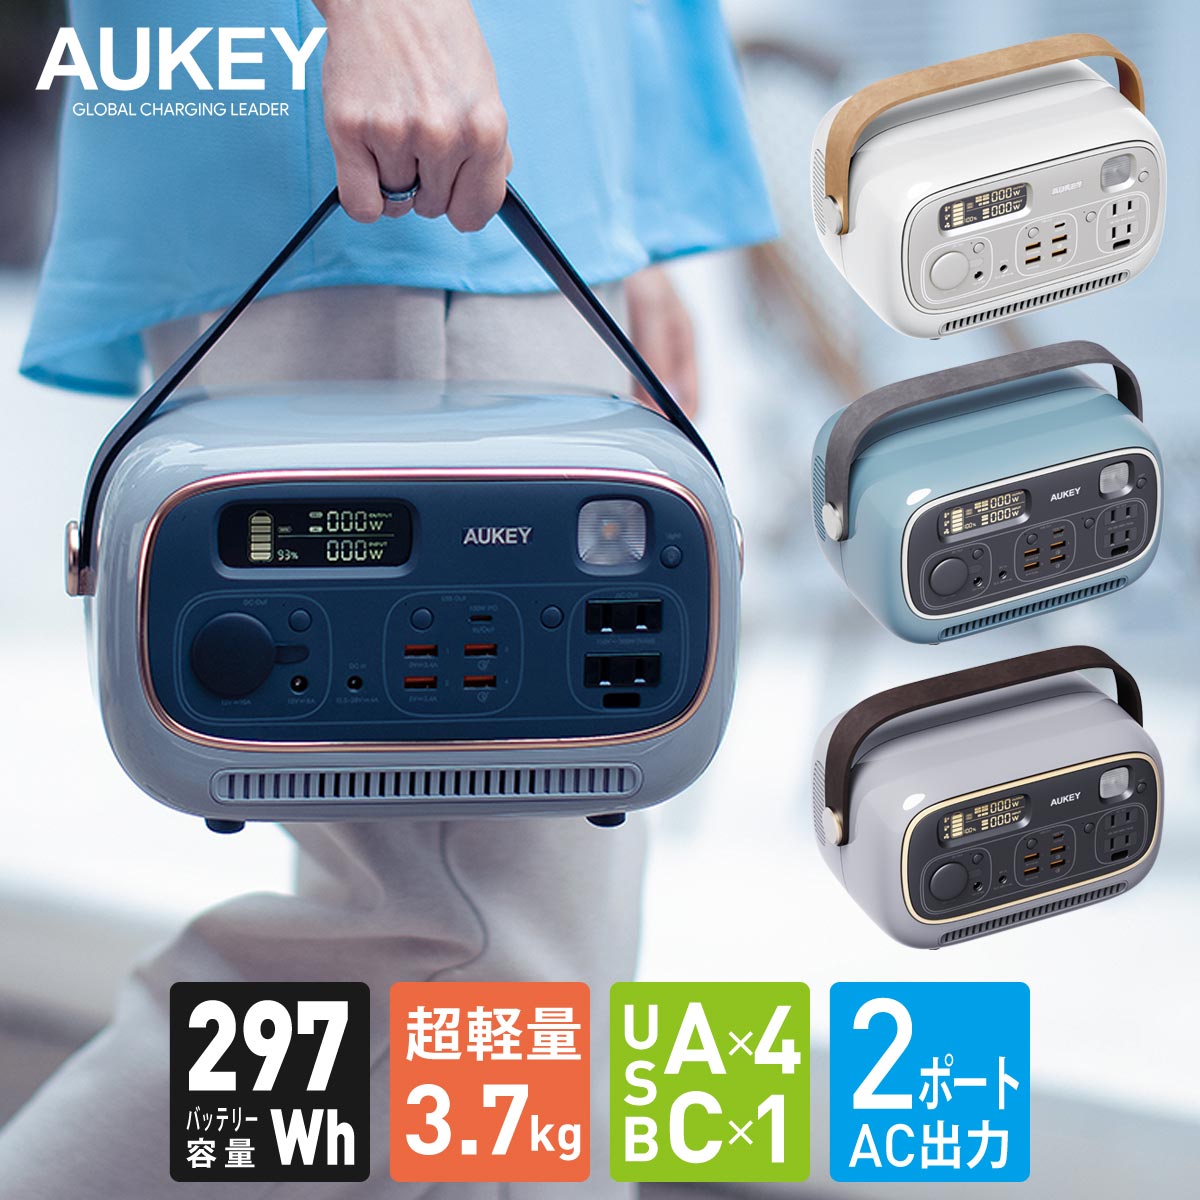 AUKEY 297Wh ポータブル電源 PS-RE03